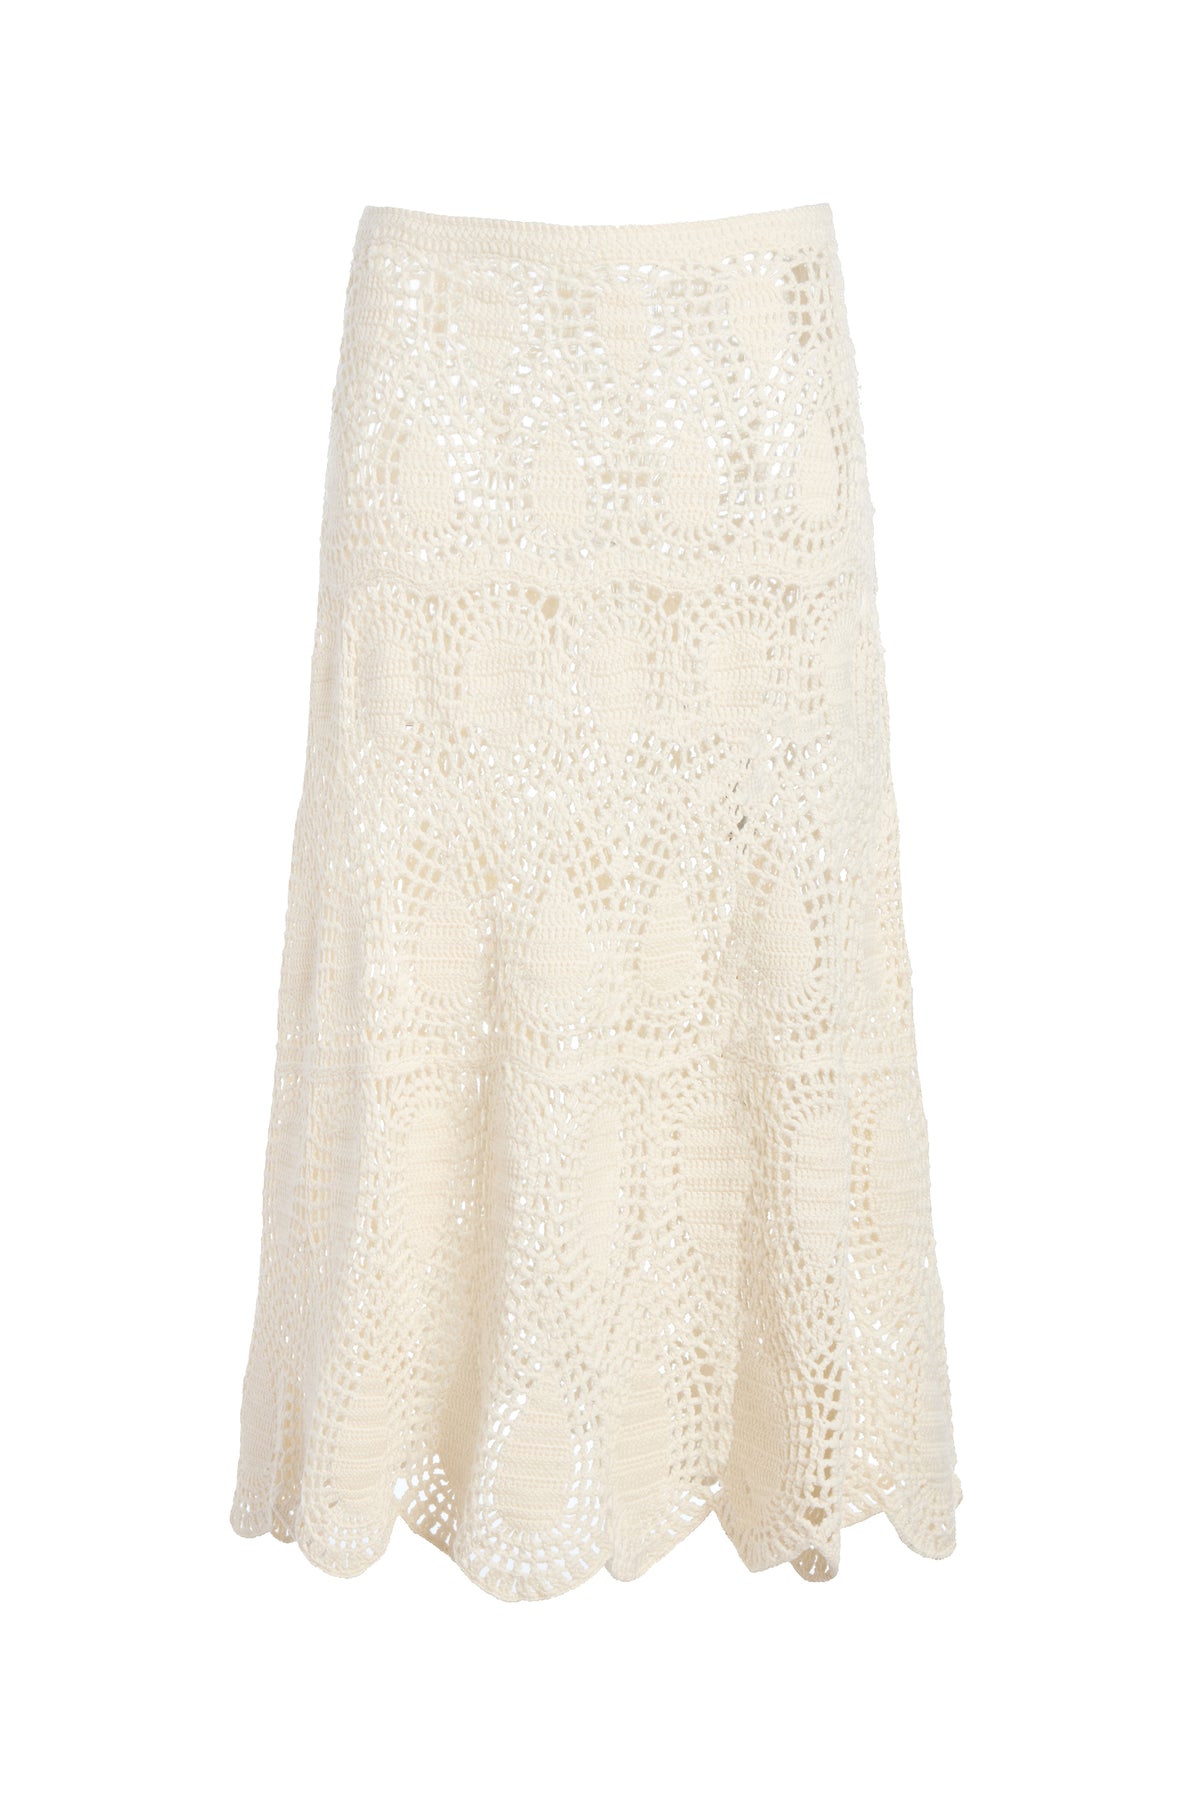 Cleo Crochet Skirt in Ivory Wool Cashmere